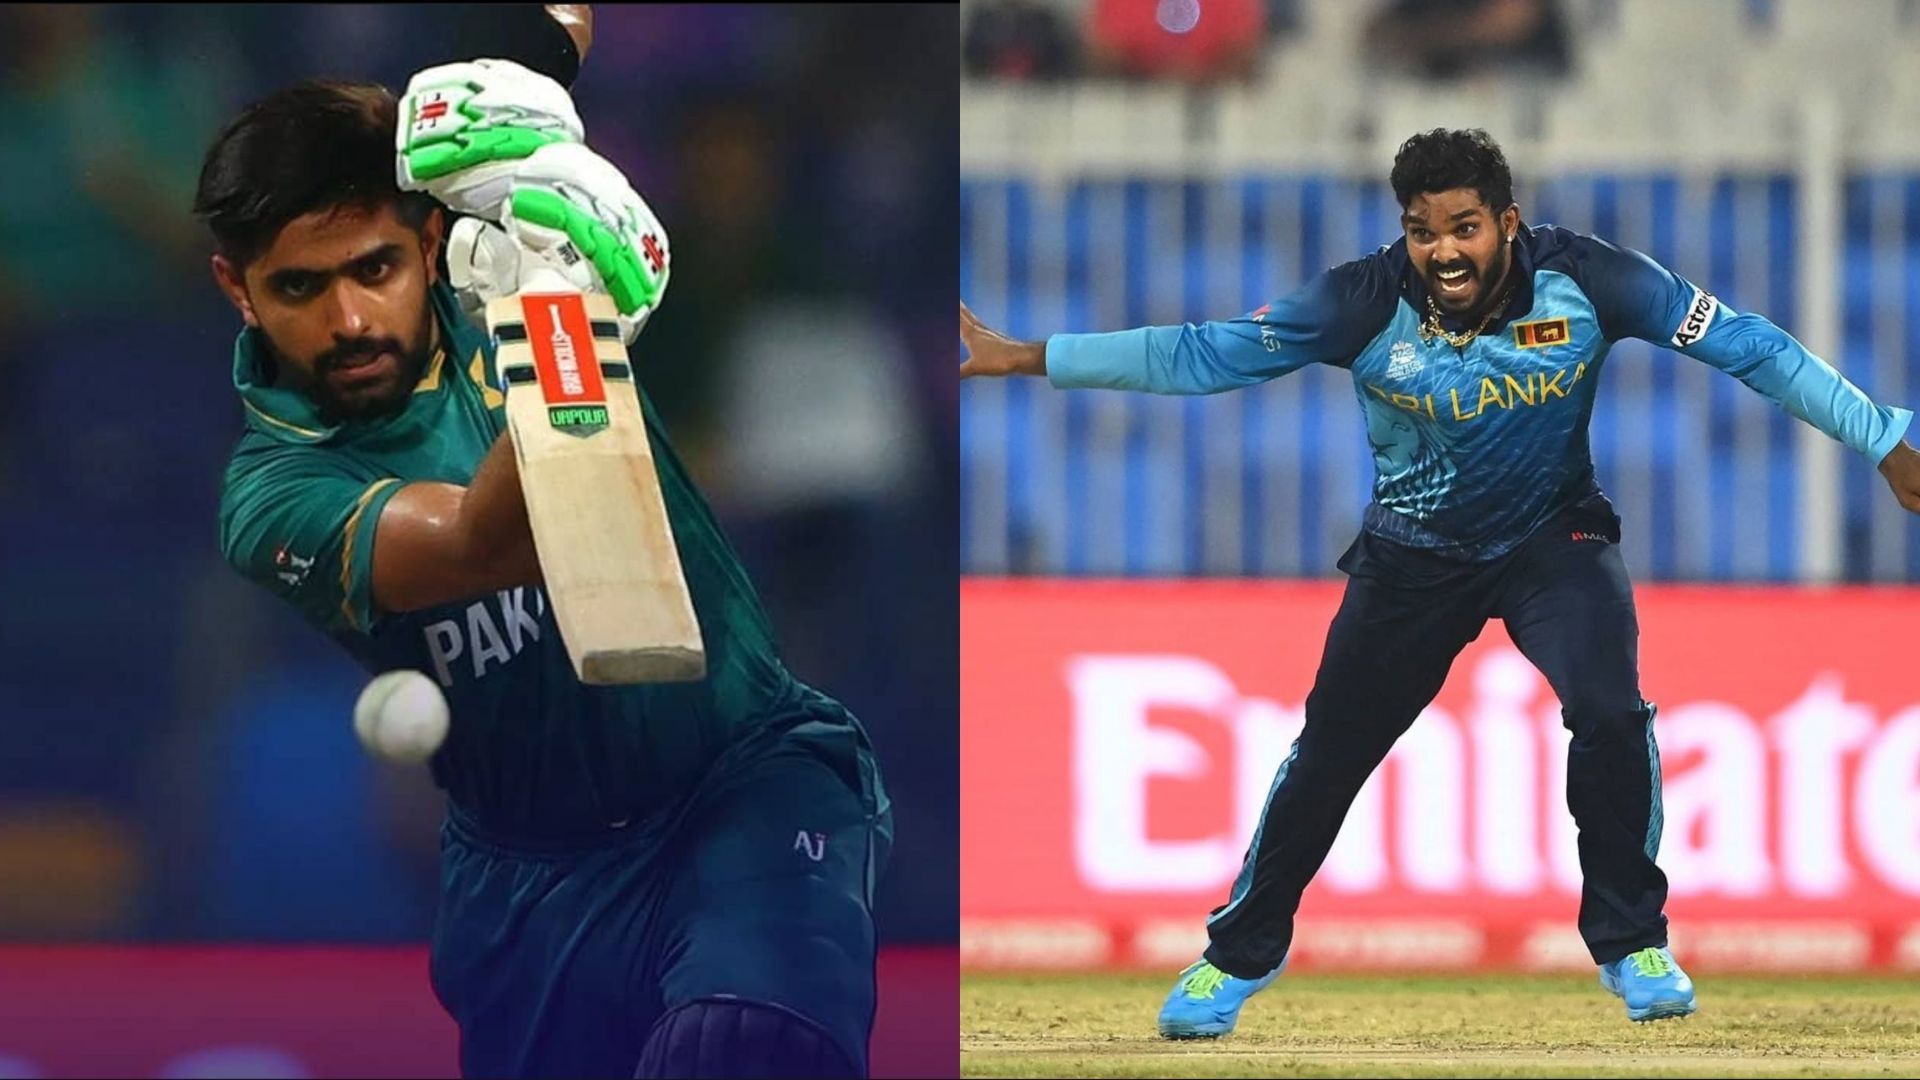 Babar Azam and Wanindu Hasaranga have been exceptional in the ICC T20 World Cup 2021